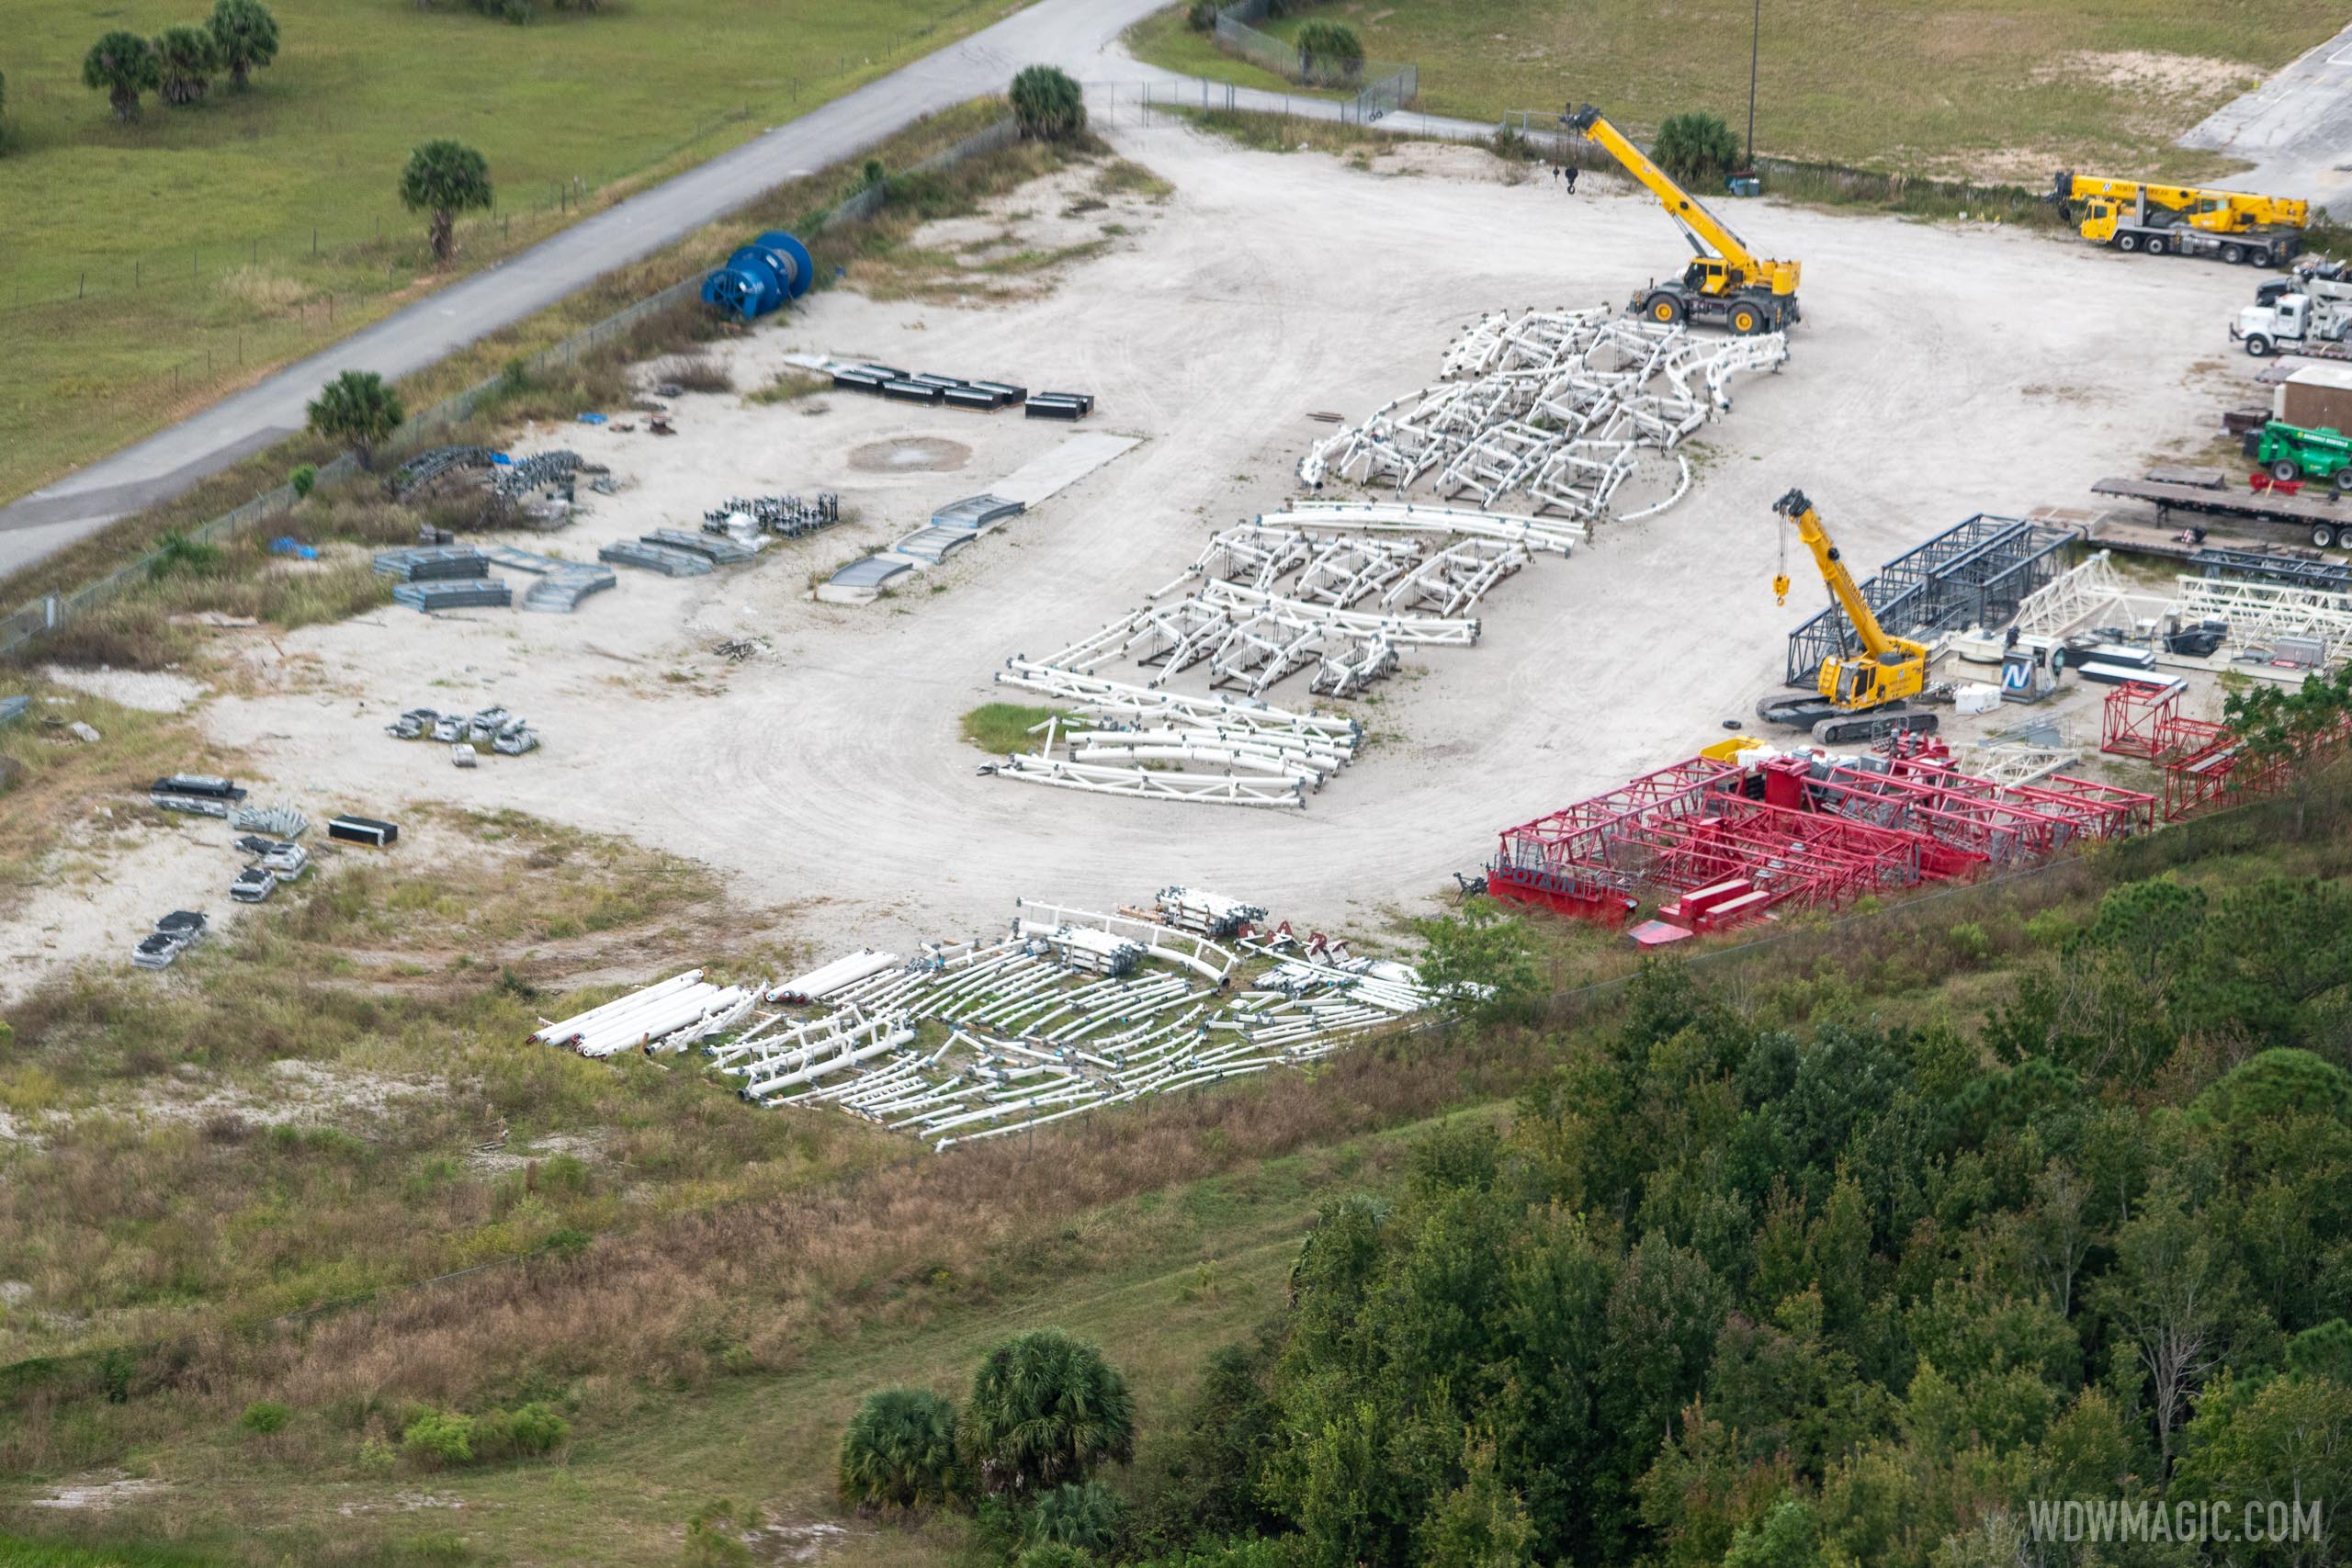 TRON Canopy parts awaiting installation - Aerial photo for WDWMAGIC by @cchard